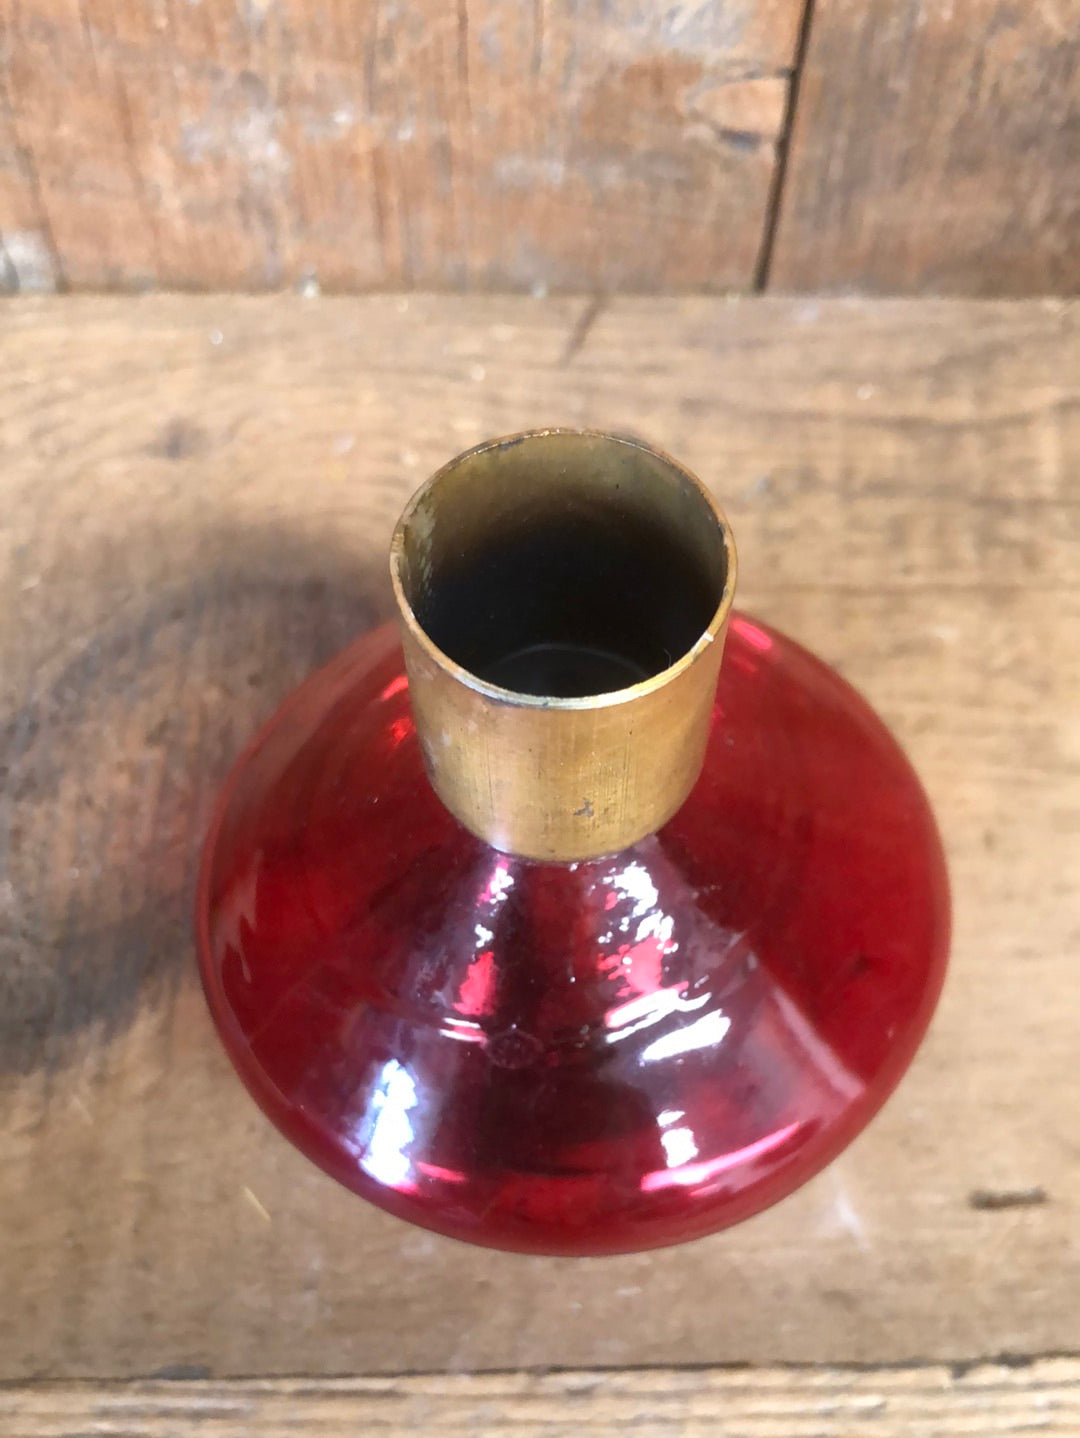 Red Glass and Metal Taper Candle Holder Medium